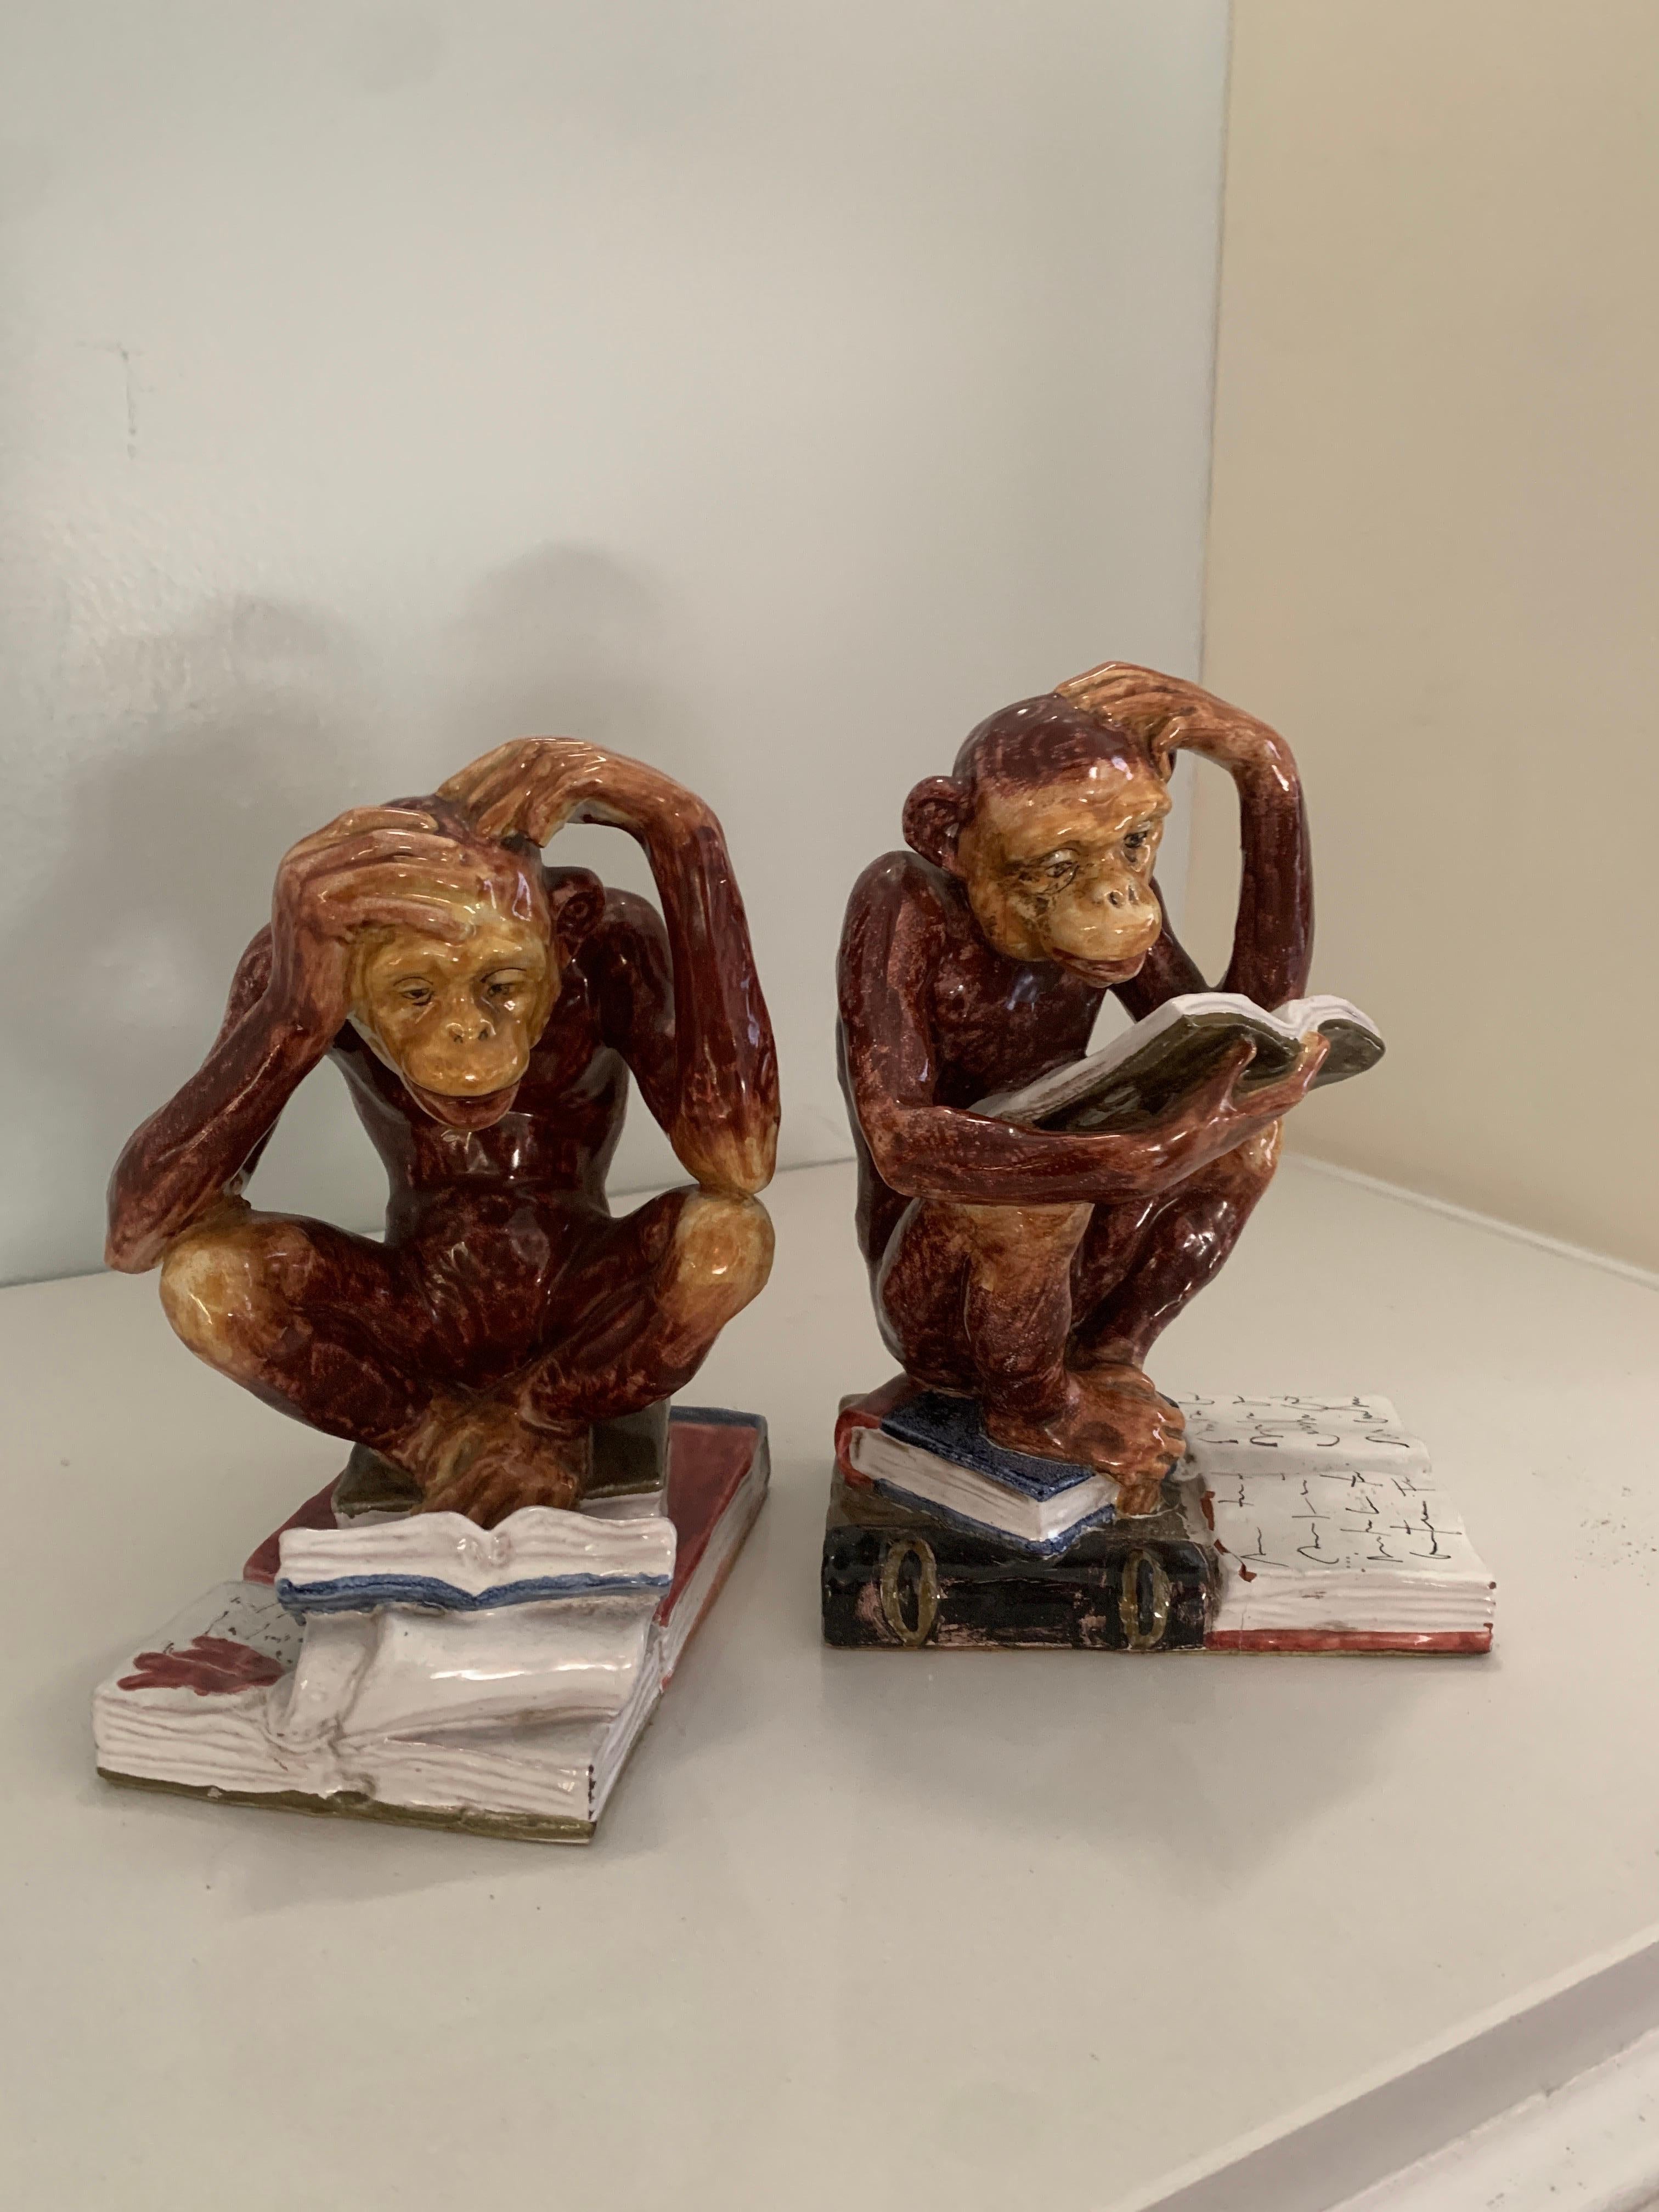 Pair of Italian Majolica Bookends. The pair are of good weight ceramic or terra cotta to hold larger books. A compliment to any shelf or desk, especially working well in a Childs room due to the whimsical nature of the studious monkeys